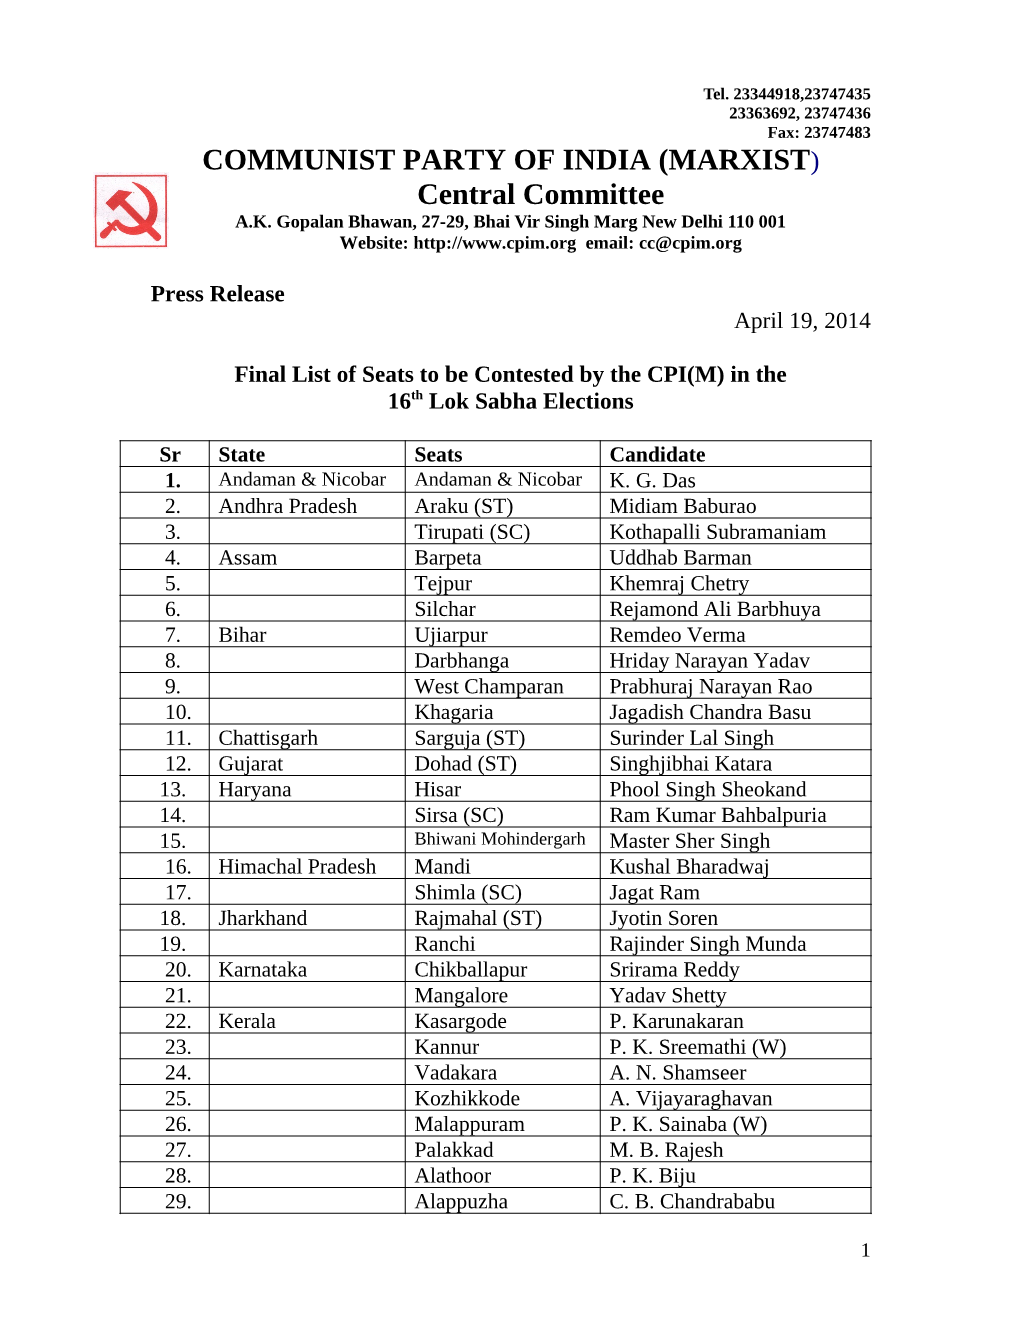 List of Candidates 2014